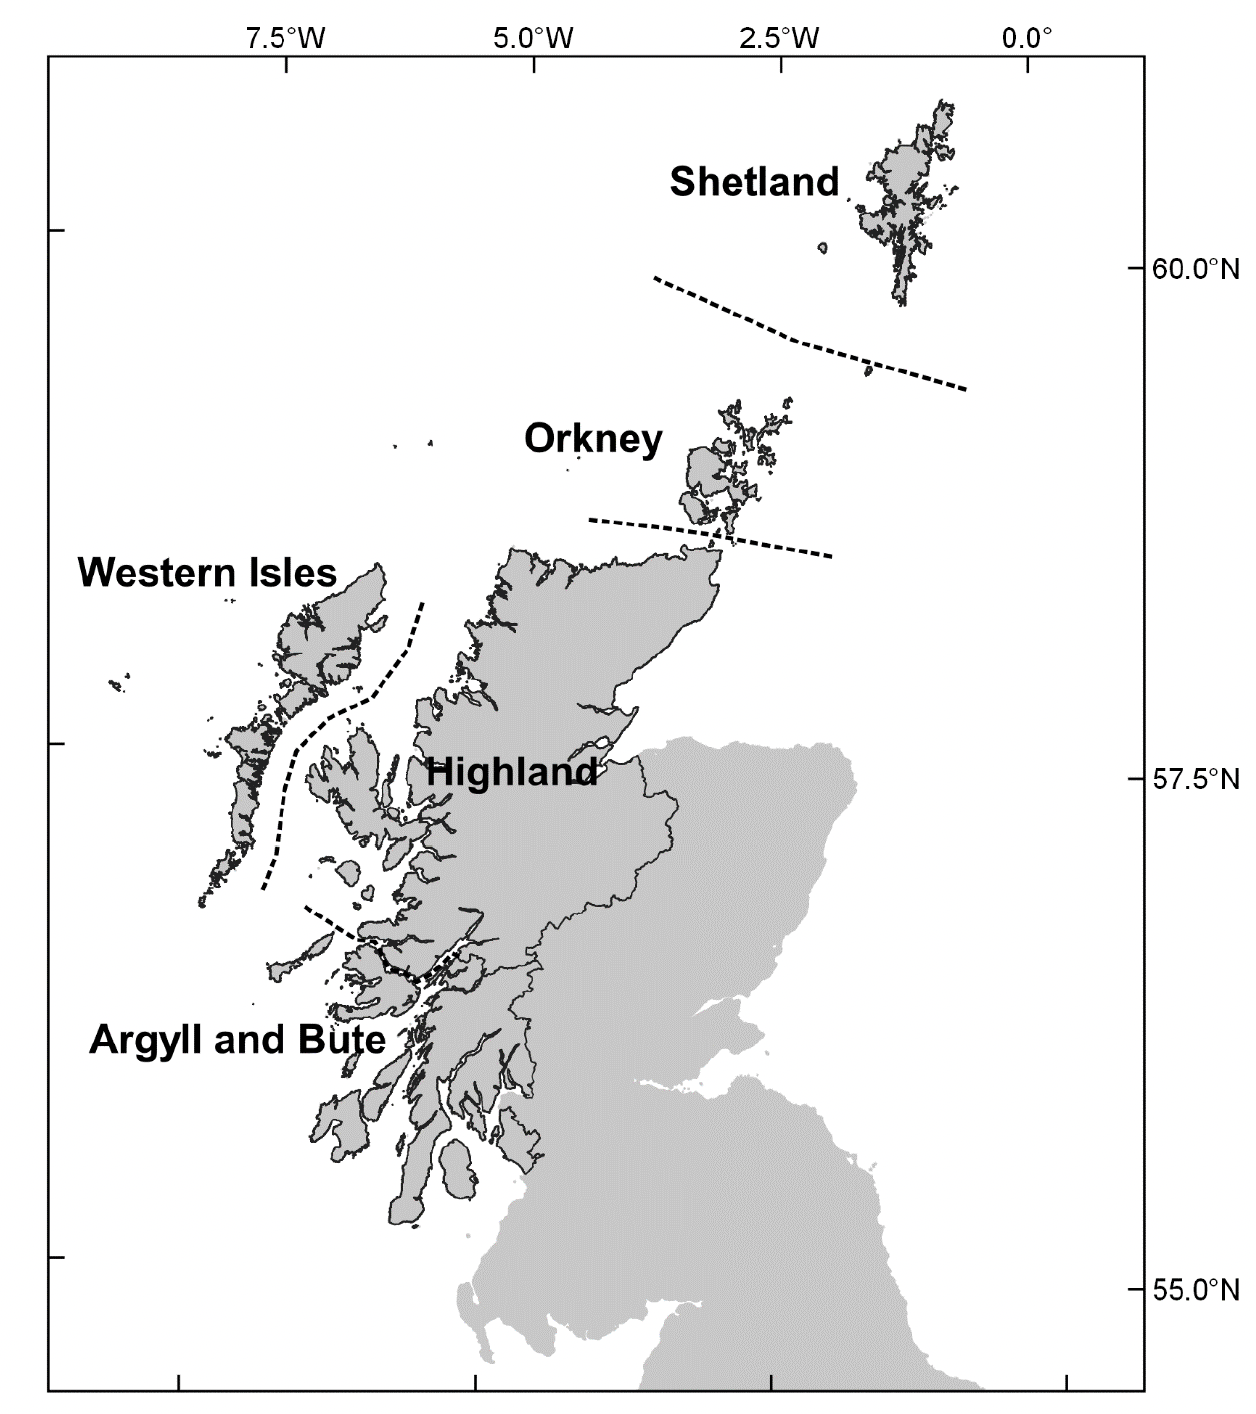 A map showing the regional categorisations of Scottish finfish farms according to local authority area. The labelled areas on the map are Argyll and Bute, Highland, Orkney, Shetland, and Western Isles.